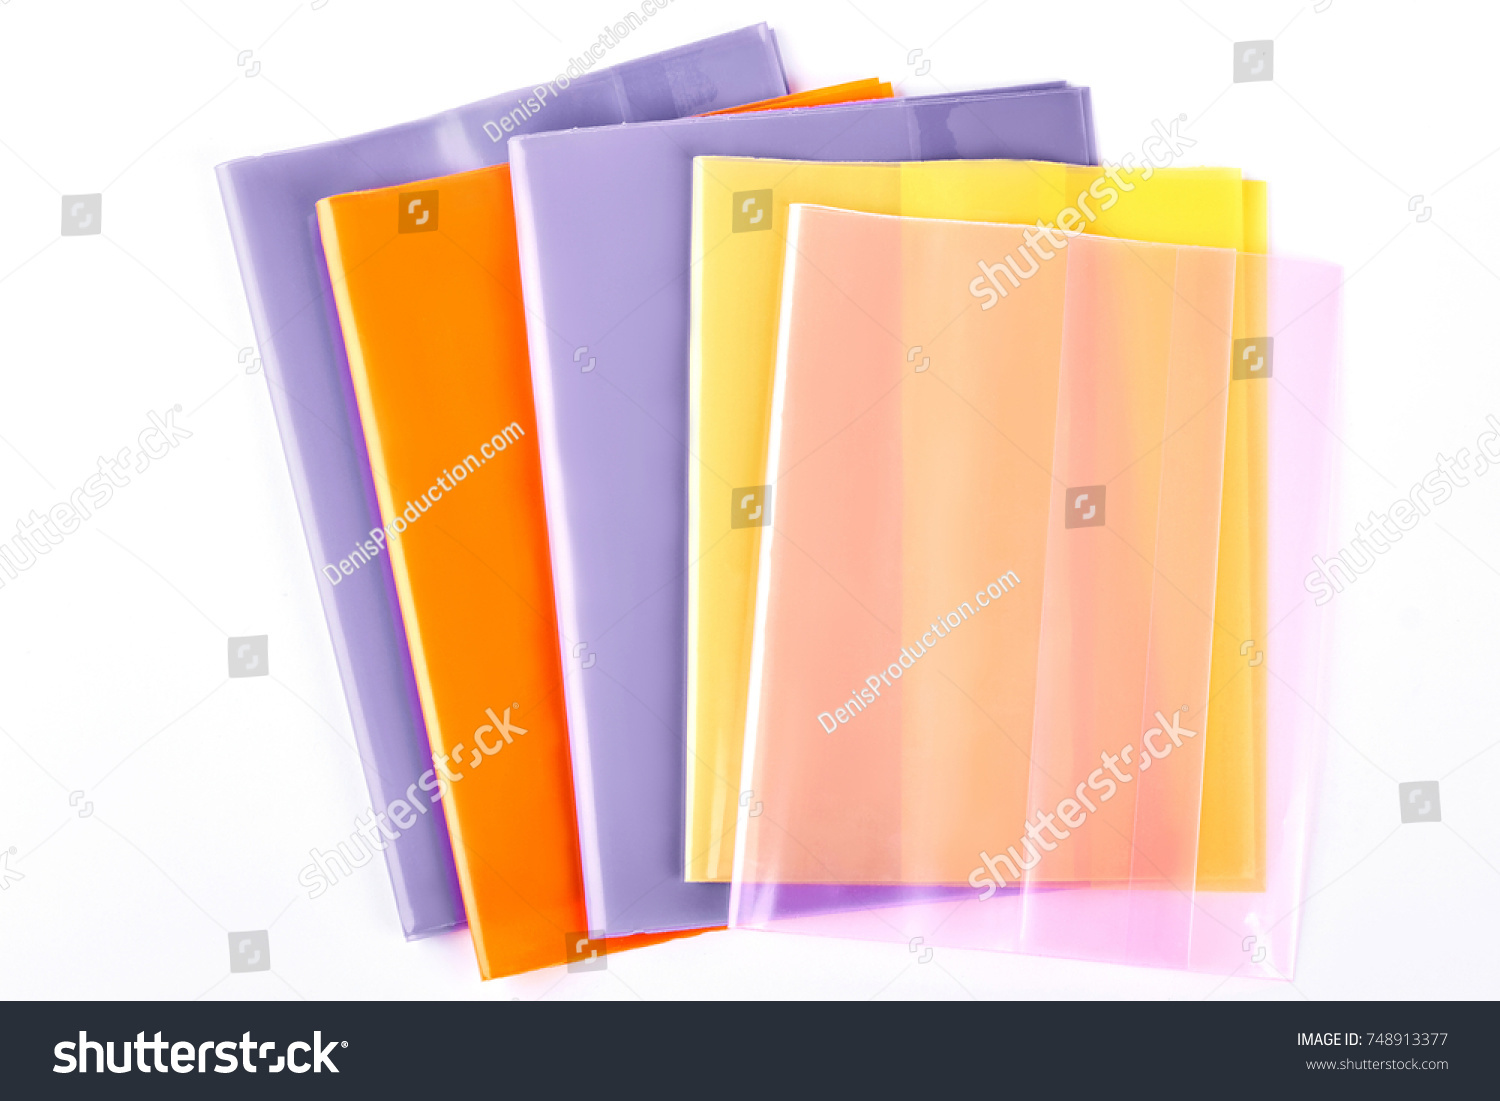 Set of colorful folders for documents. Multicolored documents files holders on white background. Office products on sale. #748913377